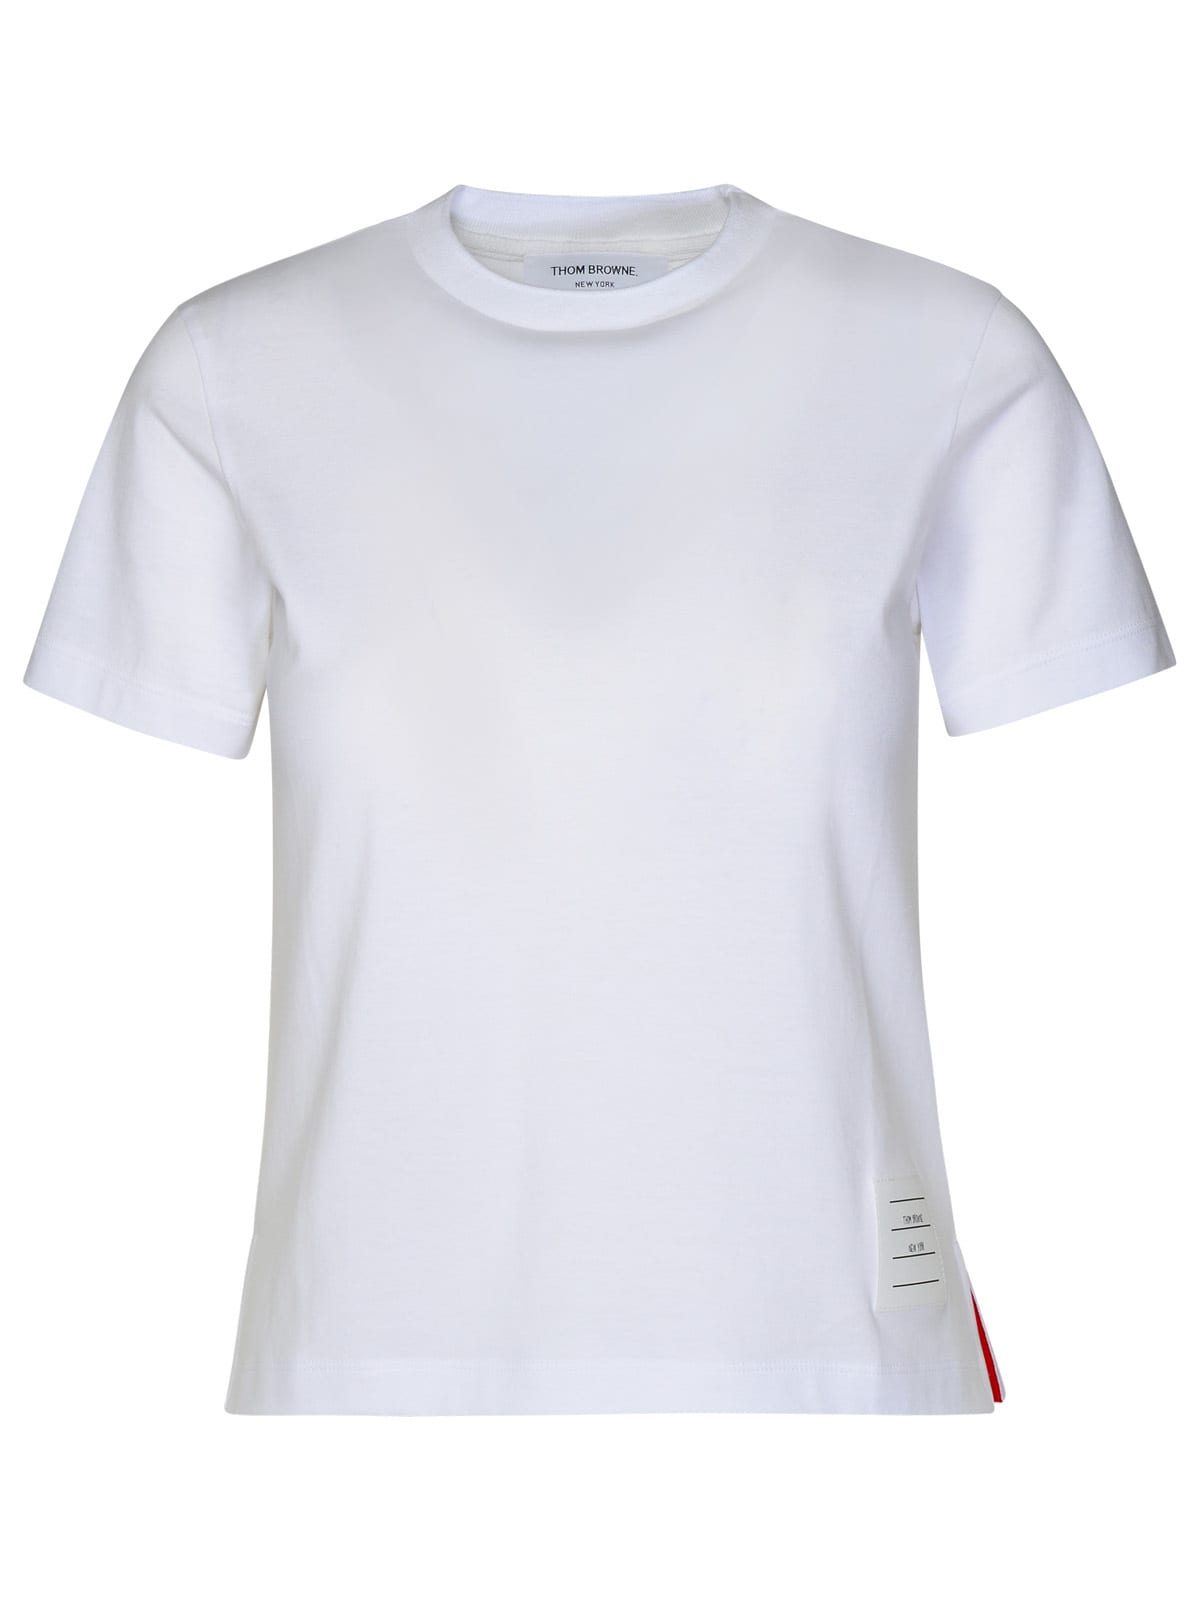 relaxed White Cotton T-shirt